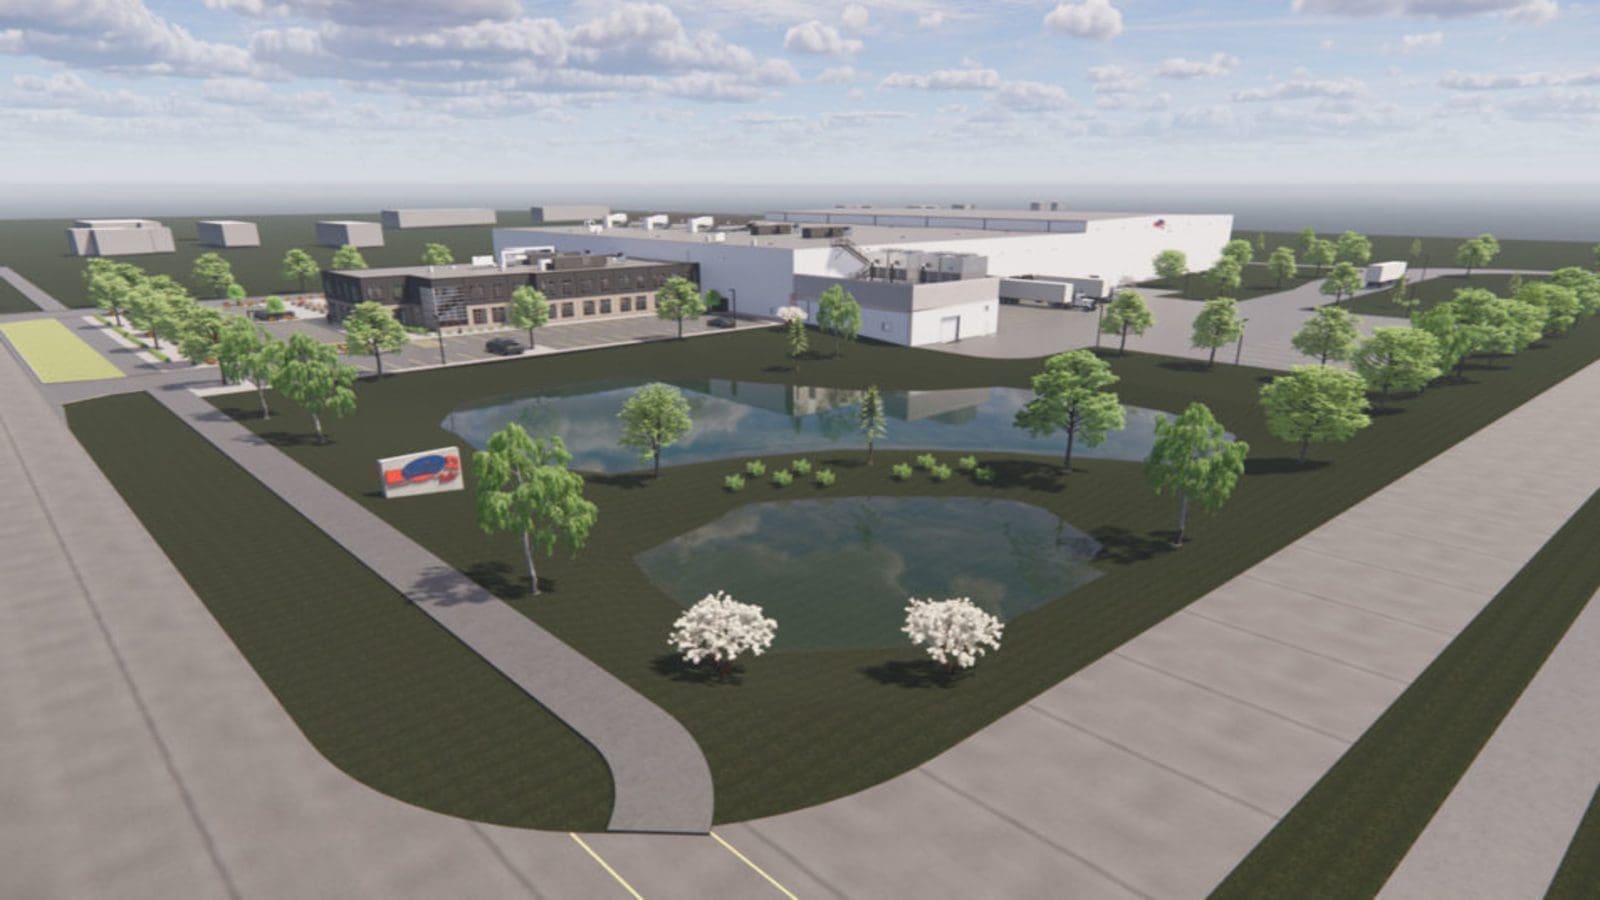 Specialty cheesemaker Emmi Roth breaks ground on new US facility